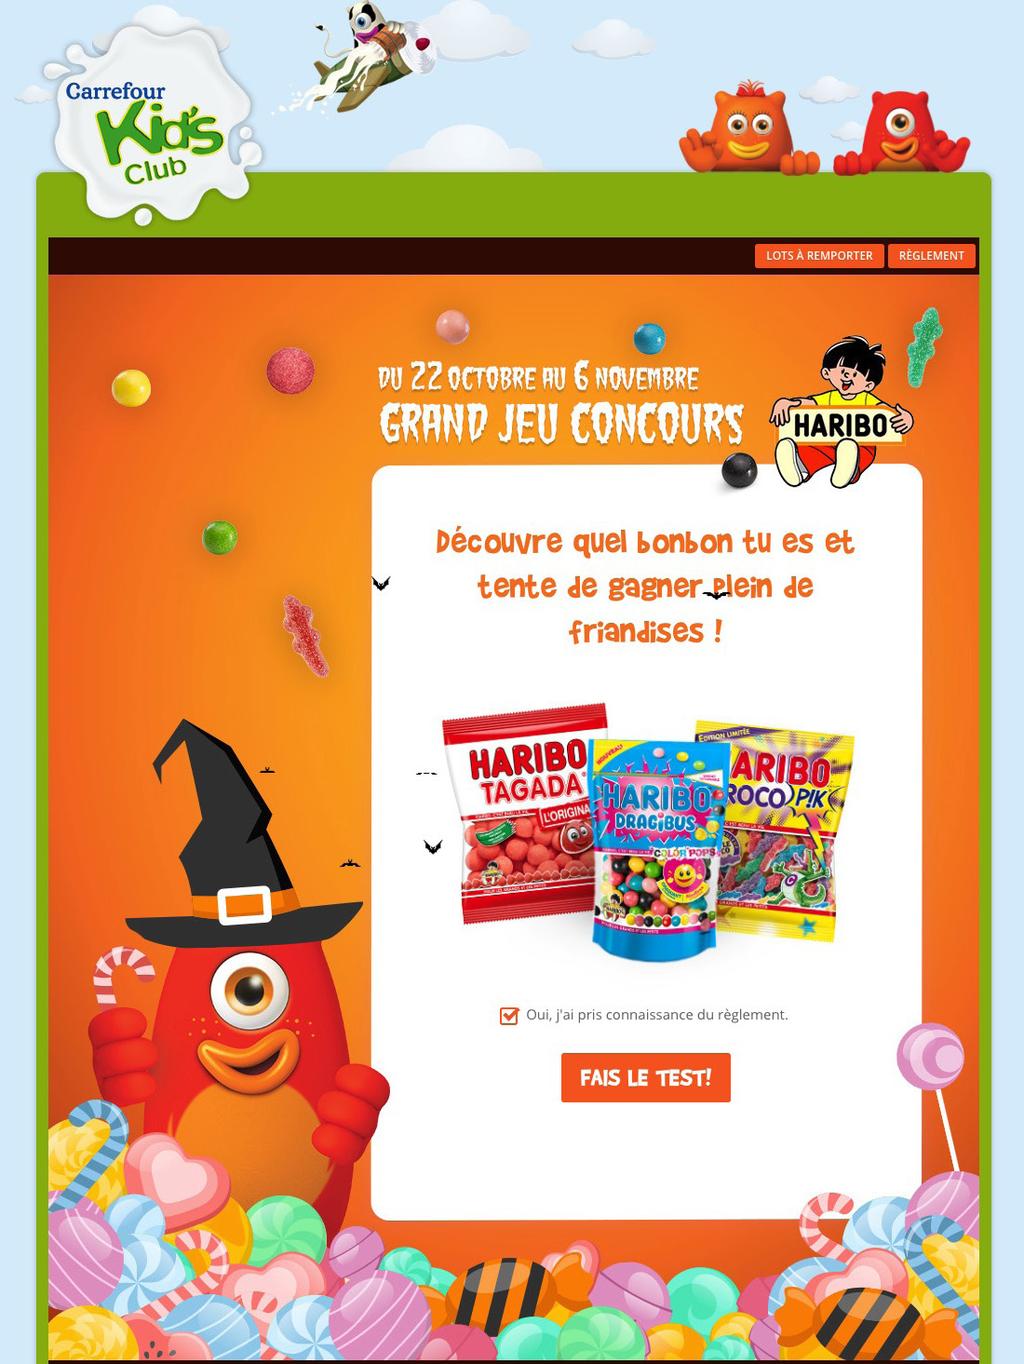 01 Carrefour Kid s Club Just for kids Carrefour proposes members of its loyalty program who have children between 3 and 12 years of age to join the Carrefour Kid s Club.